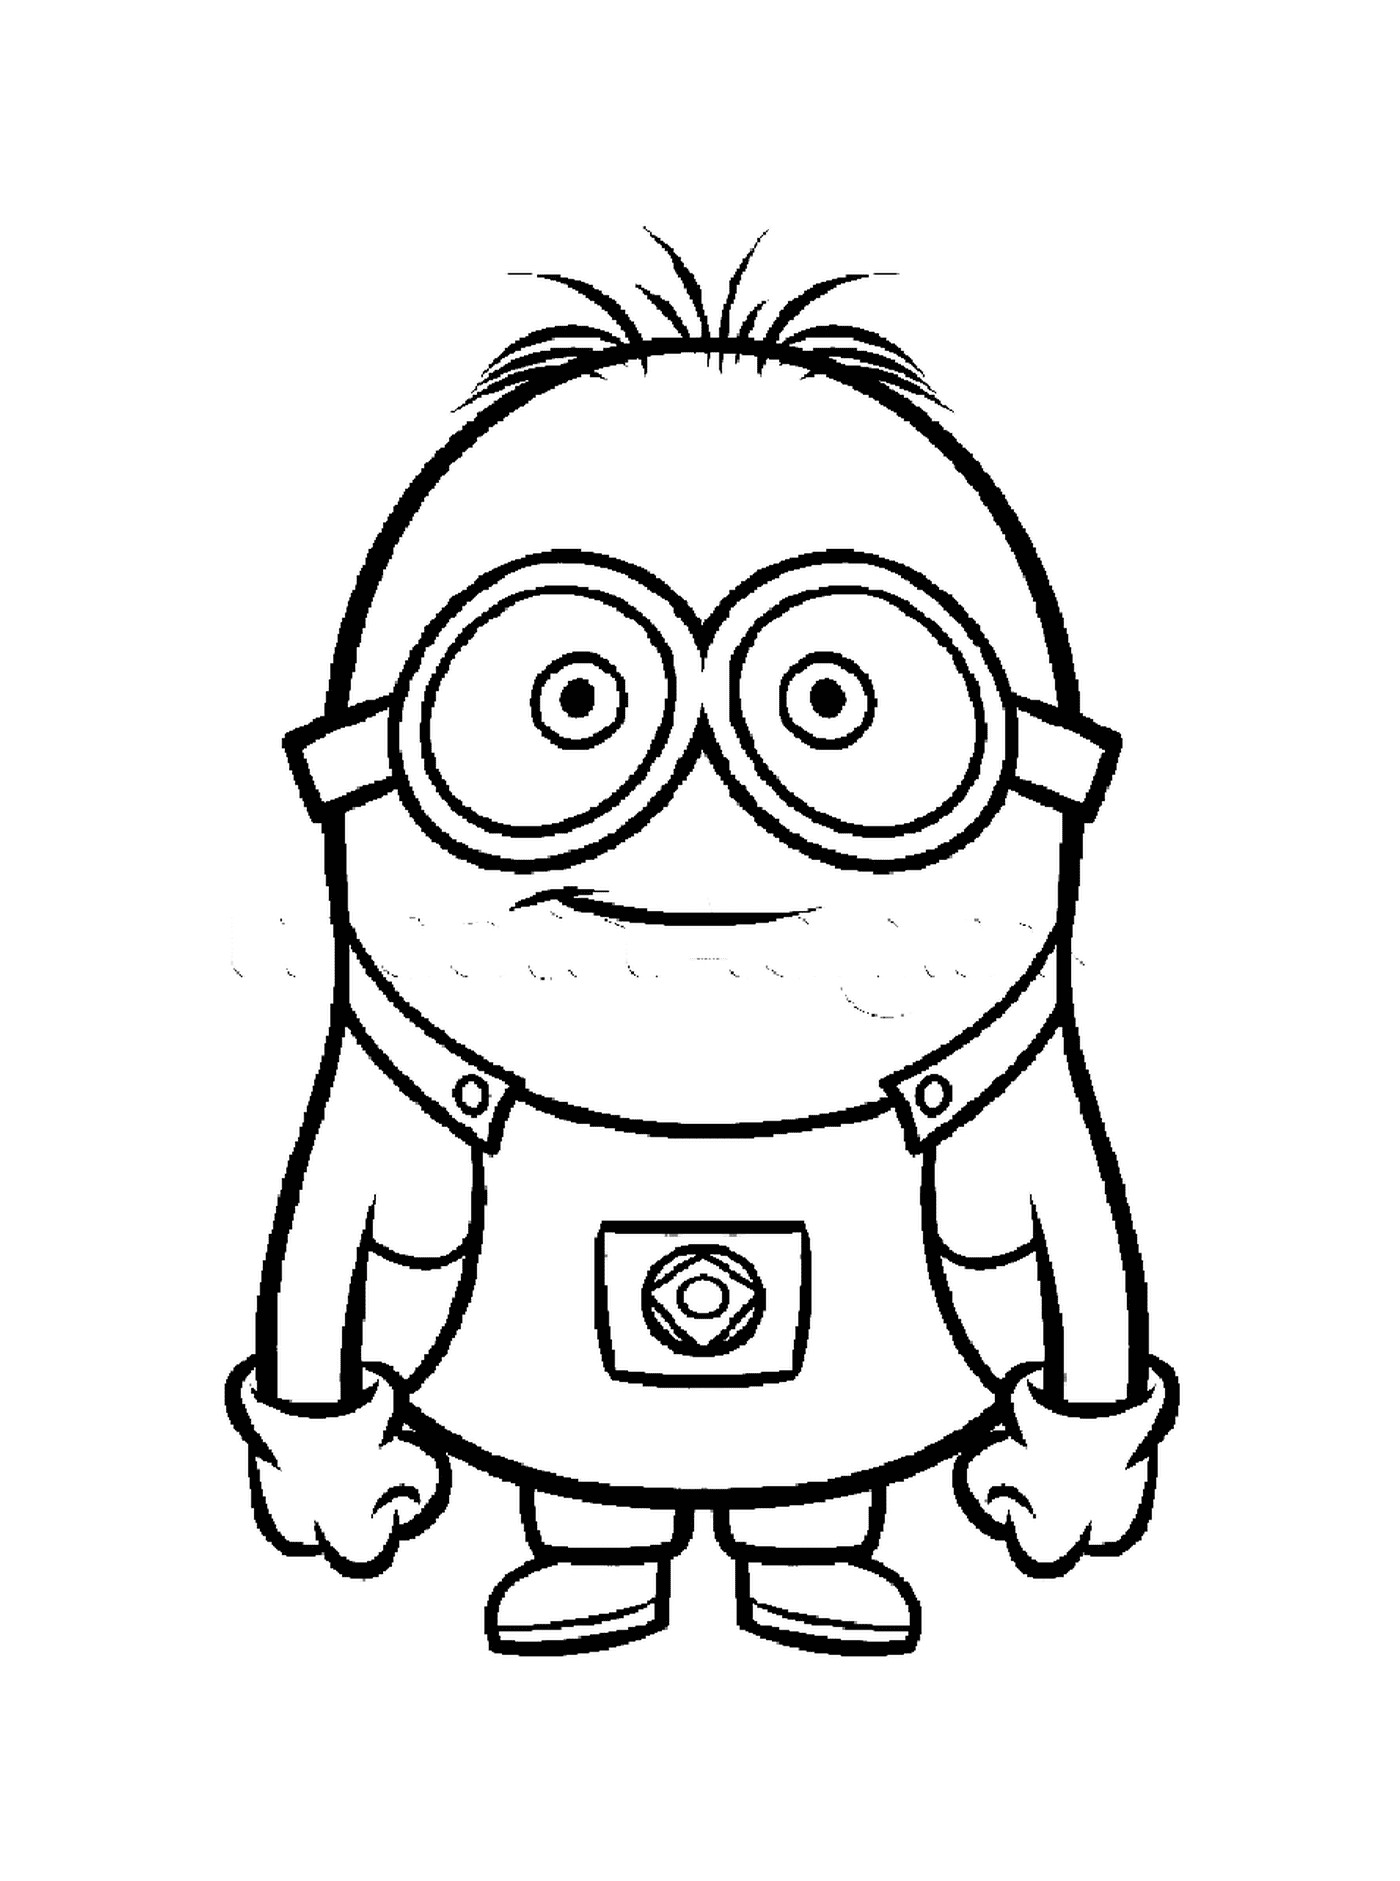  Portrait of a Minion, animated character 